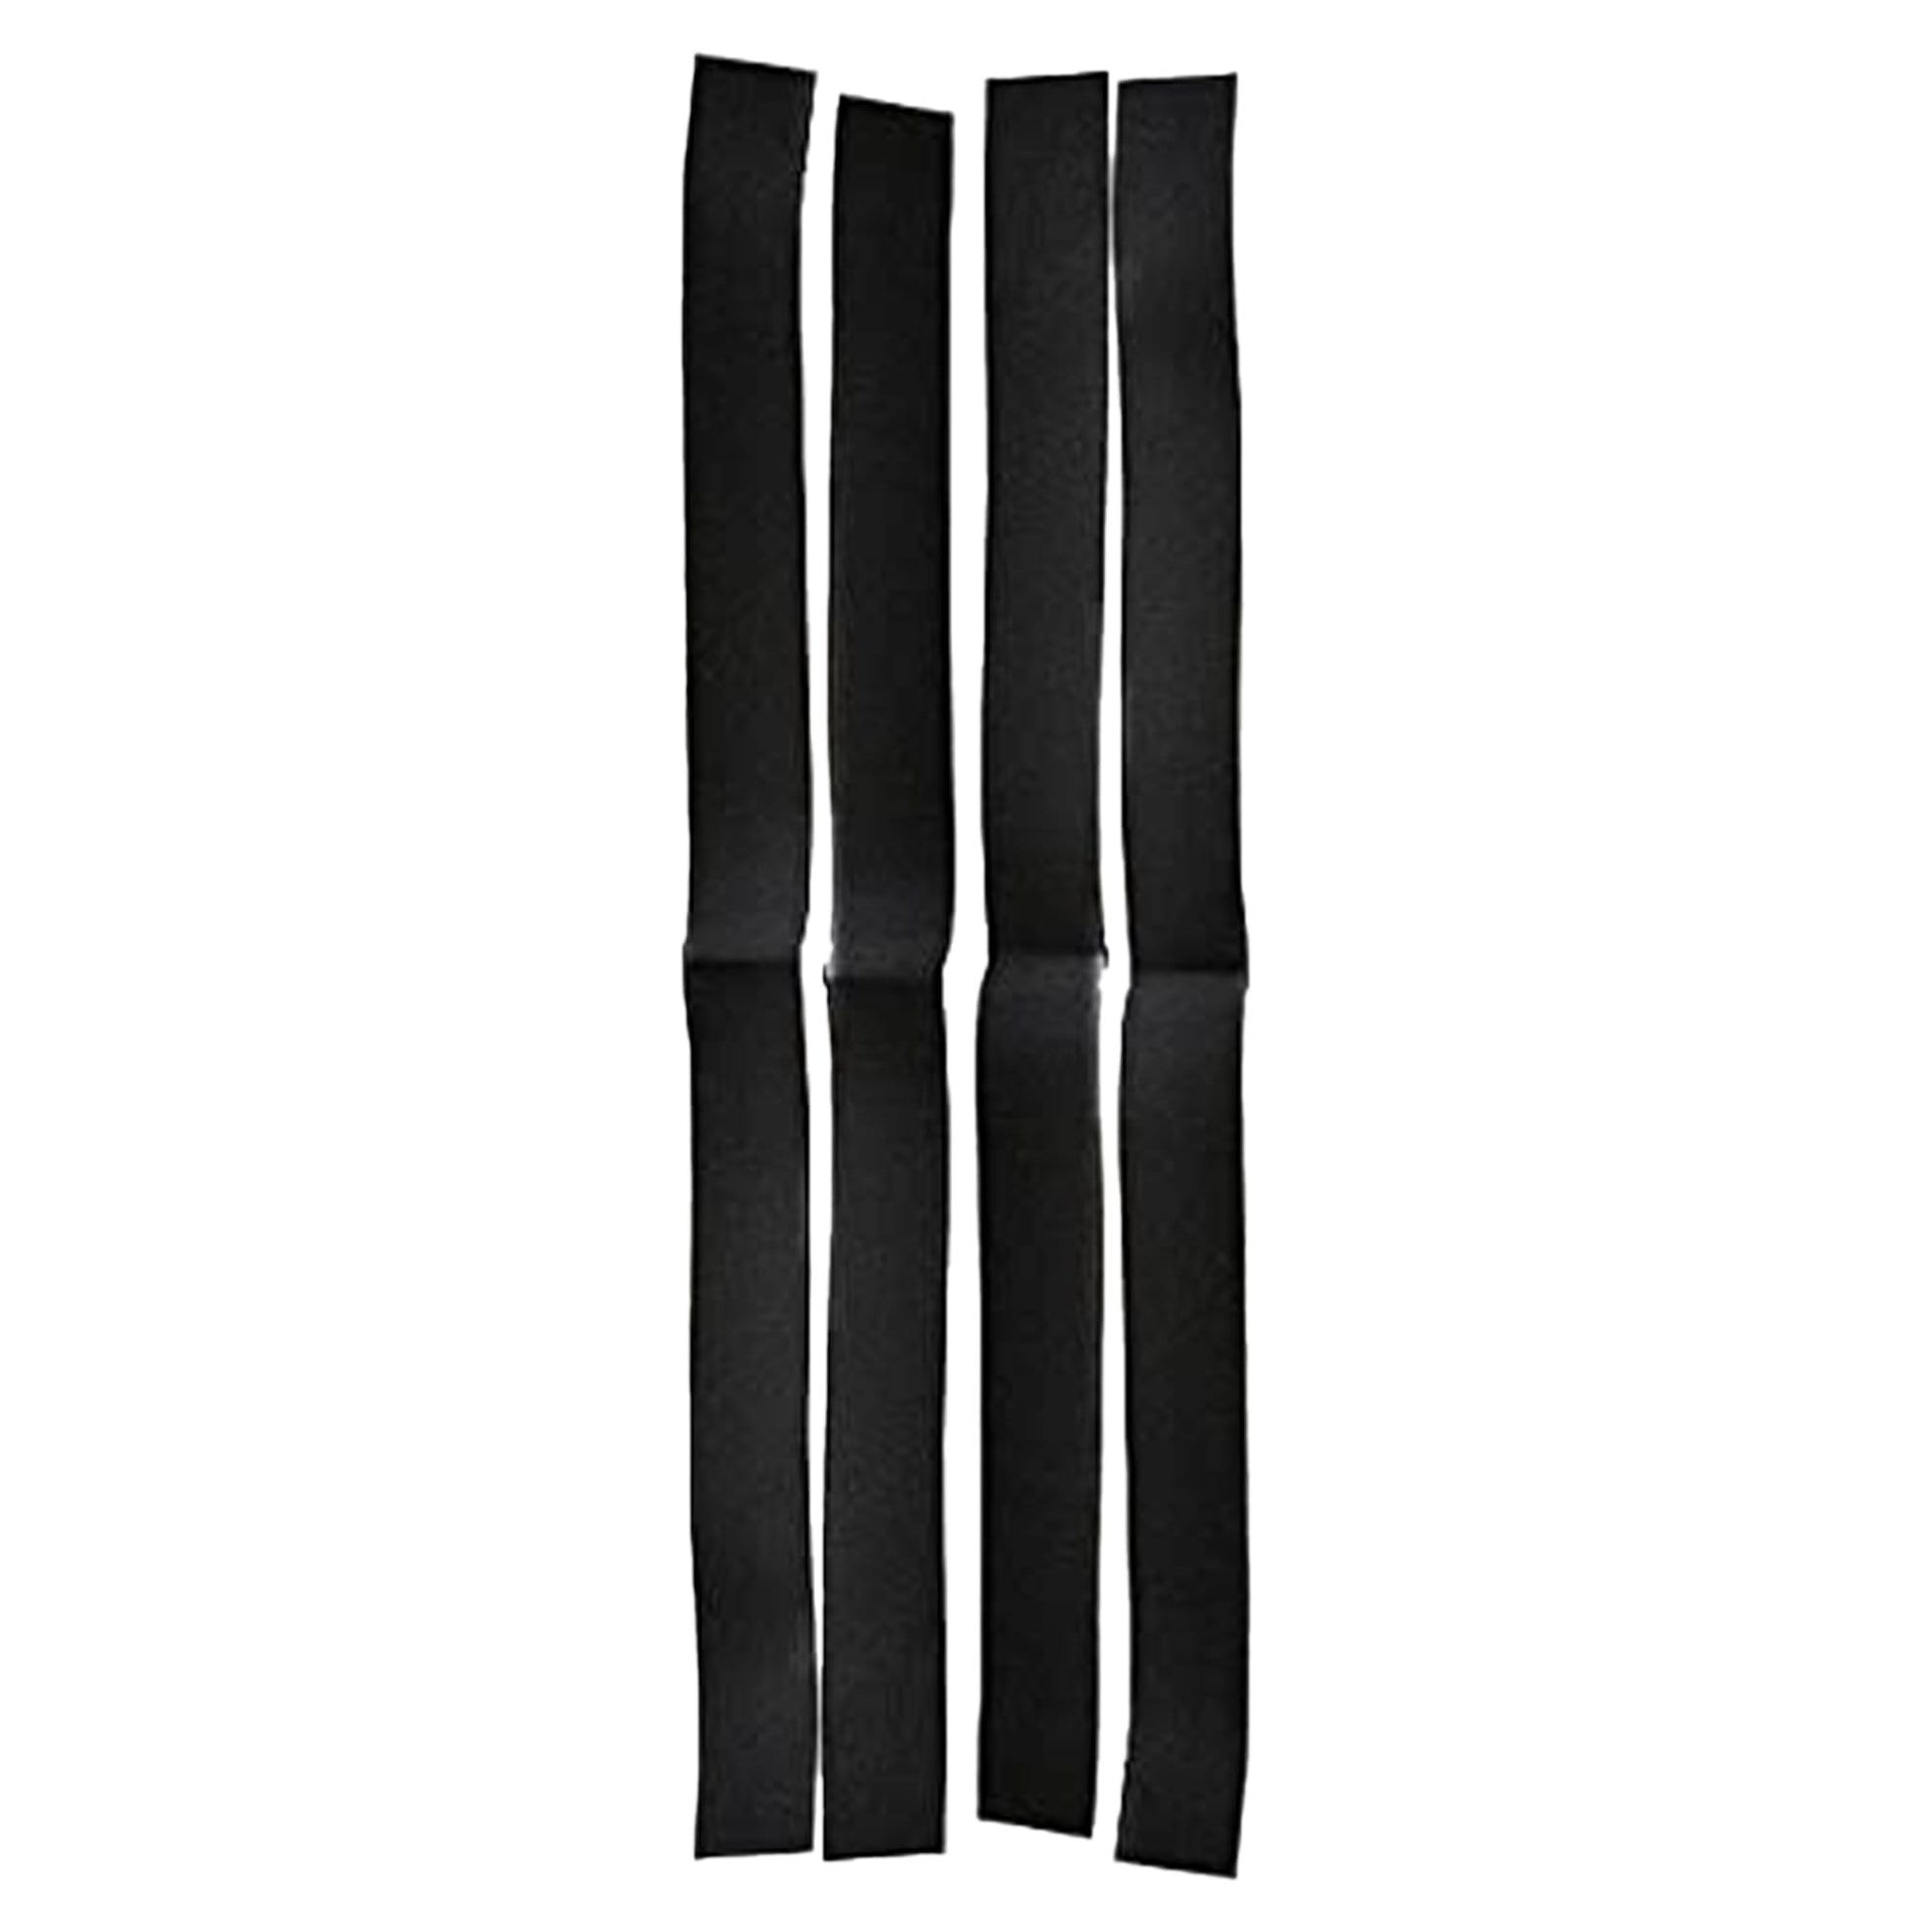 Tama Nylon Snare Belt MST20 (4 Pack Bundle) Drums and Percussion / Parts and Accessories / Drum Parts